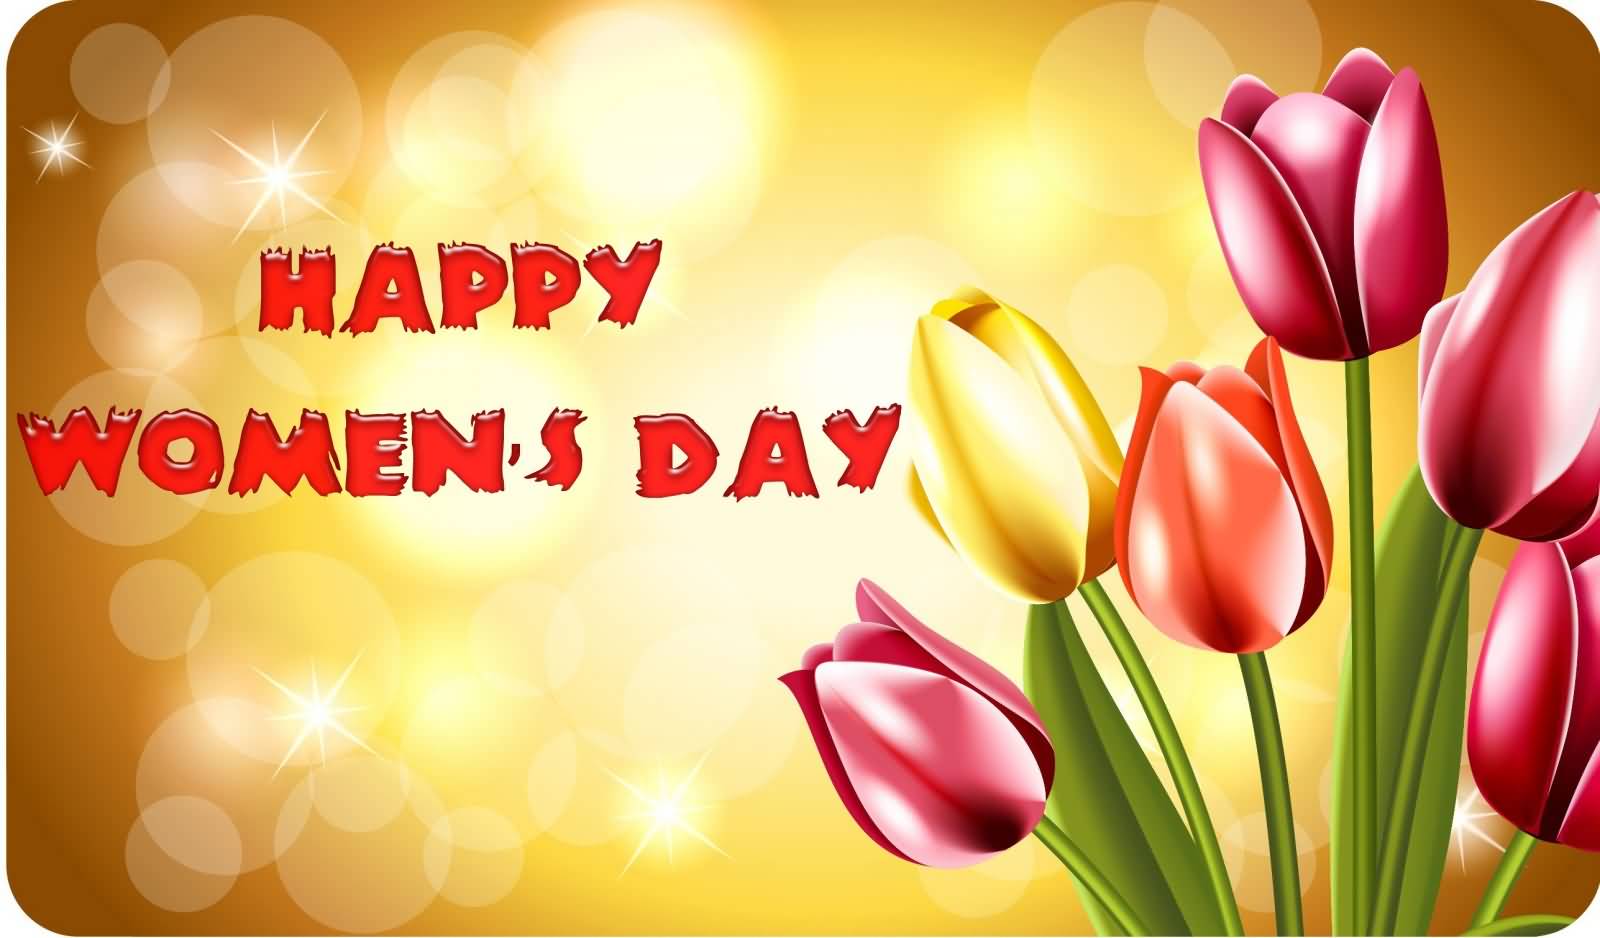 Happy Women’s Day Tulip Flowers Picture